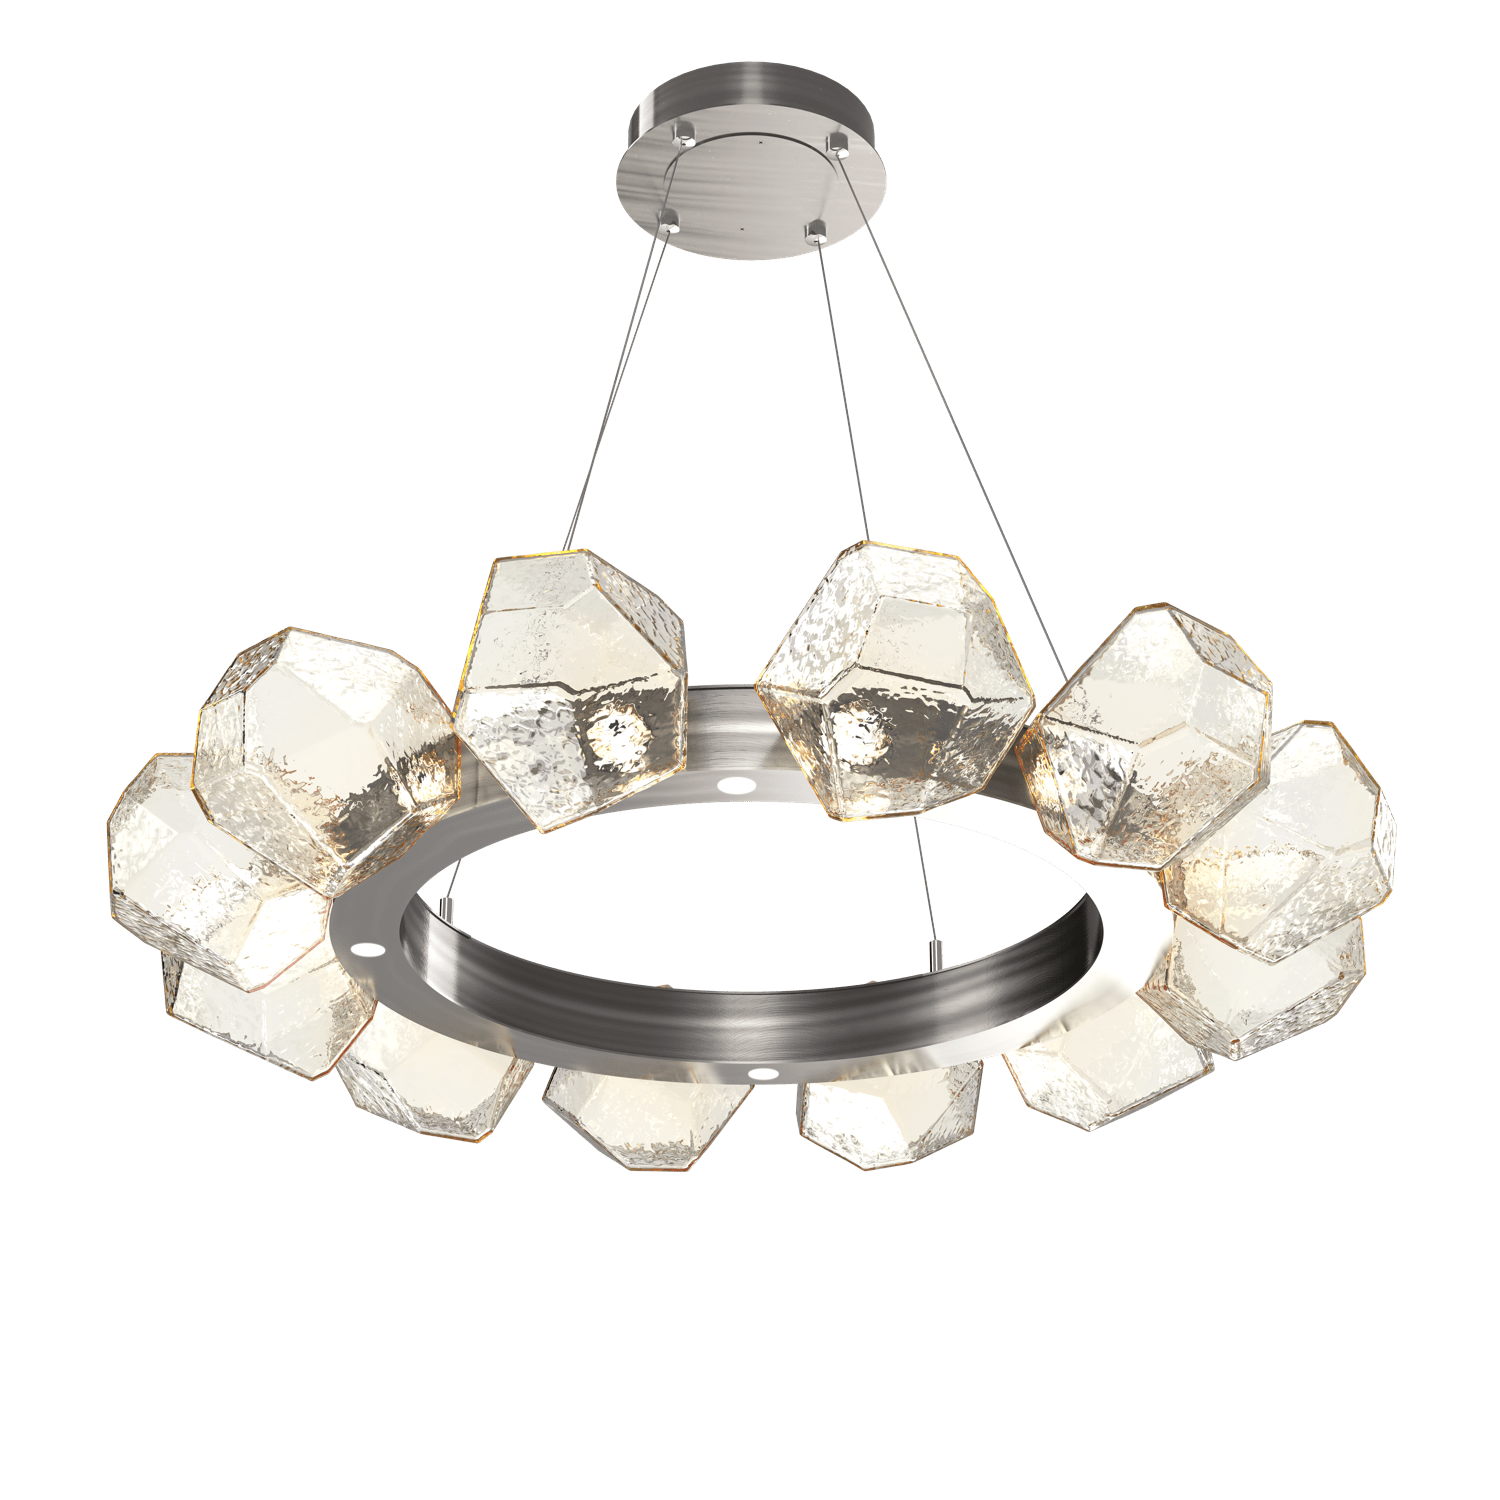 CHB0039-36-GM-A-Hammerton-Studio-Gem-36-inch-radial-ring-chandelier-with-gunmetal-finish-and-amber-blown-glass-shades-and-LED-lamping